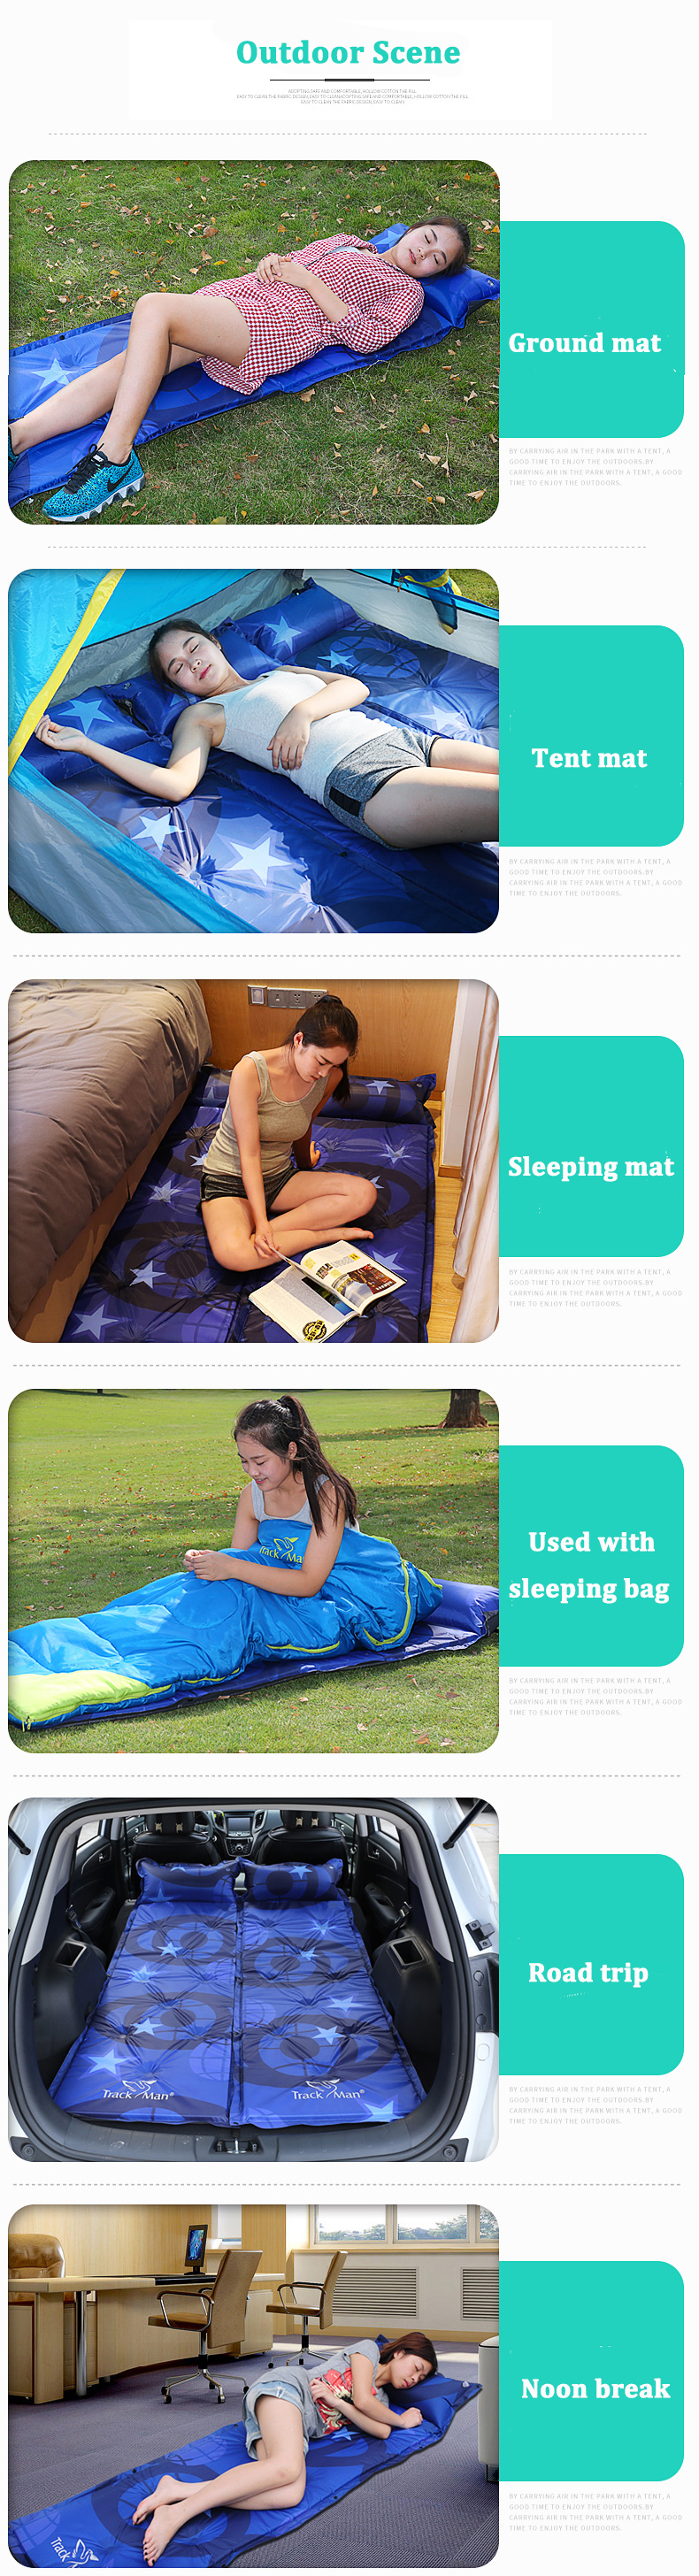 Trackman-TM2106-Outdoor-Self-Inflatable-Mattress-Camping-Moisture-proof-Sleeping-Pad-With-Pillow-1266603-6